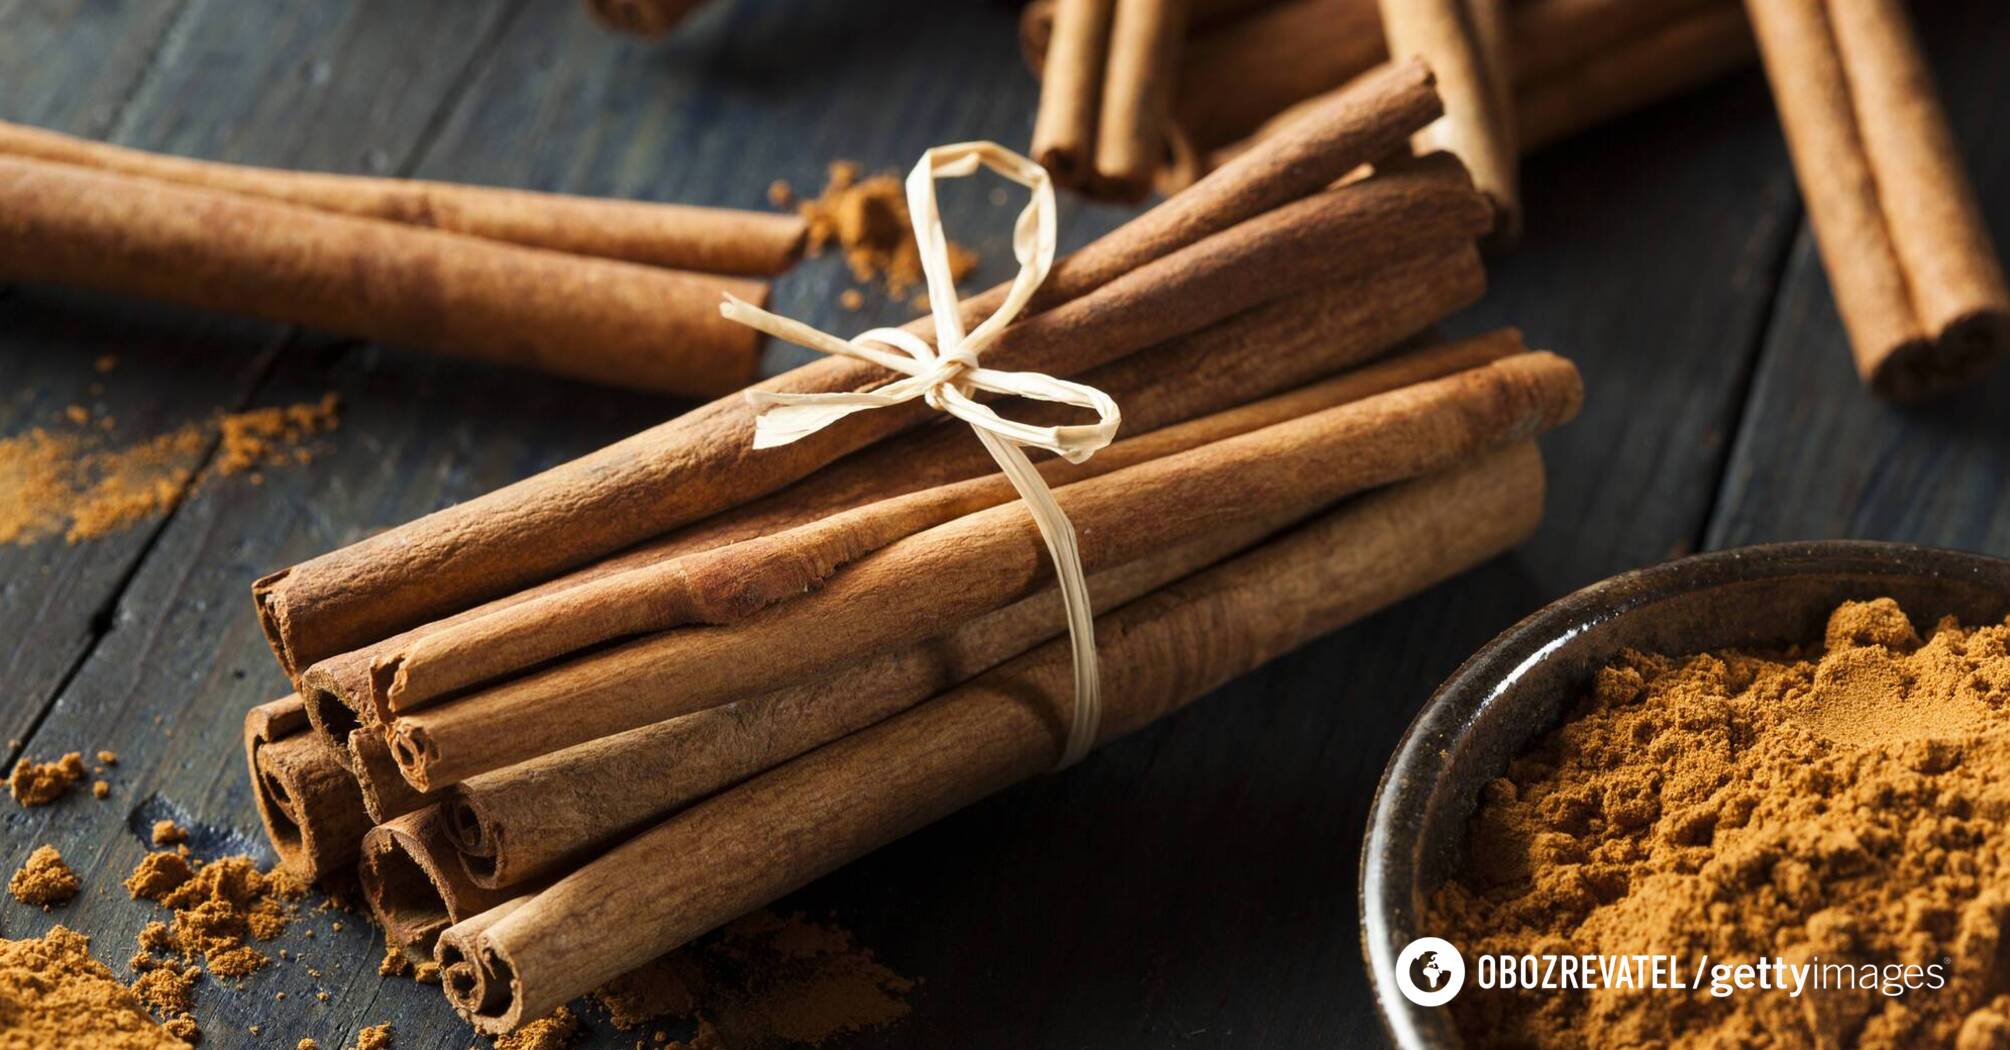 Cinnamon can reduce fatigue and improve mood